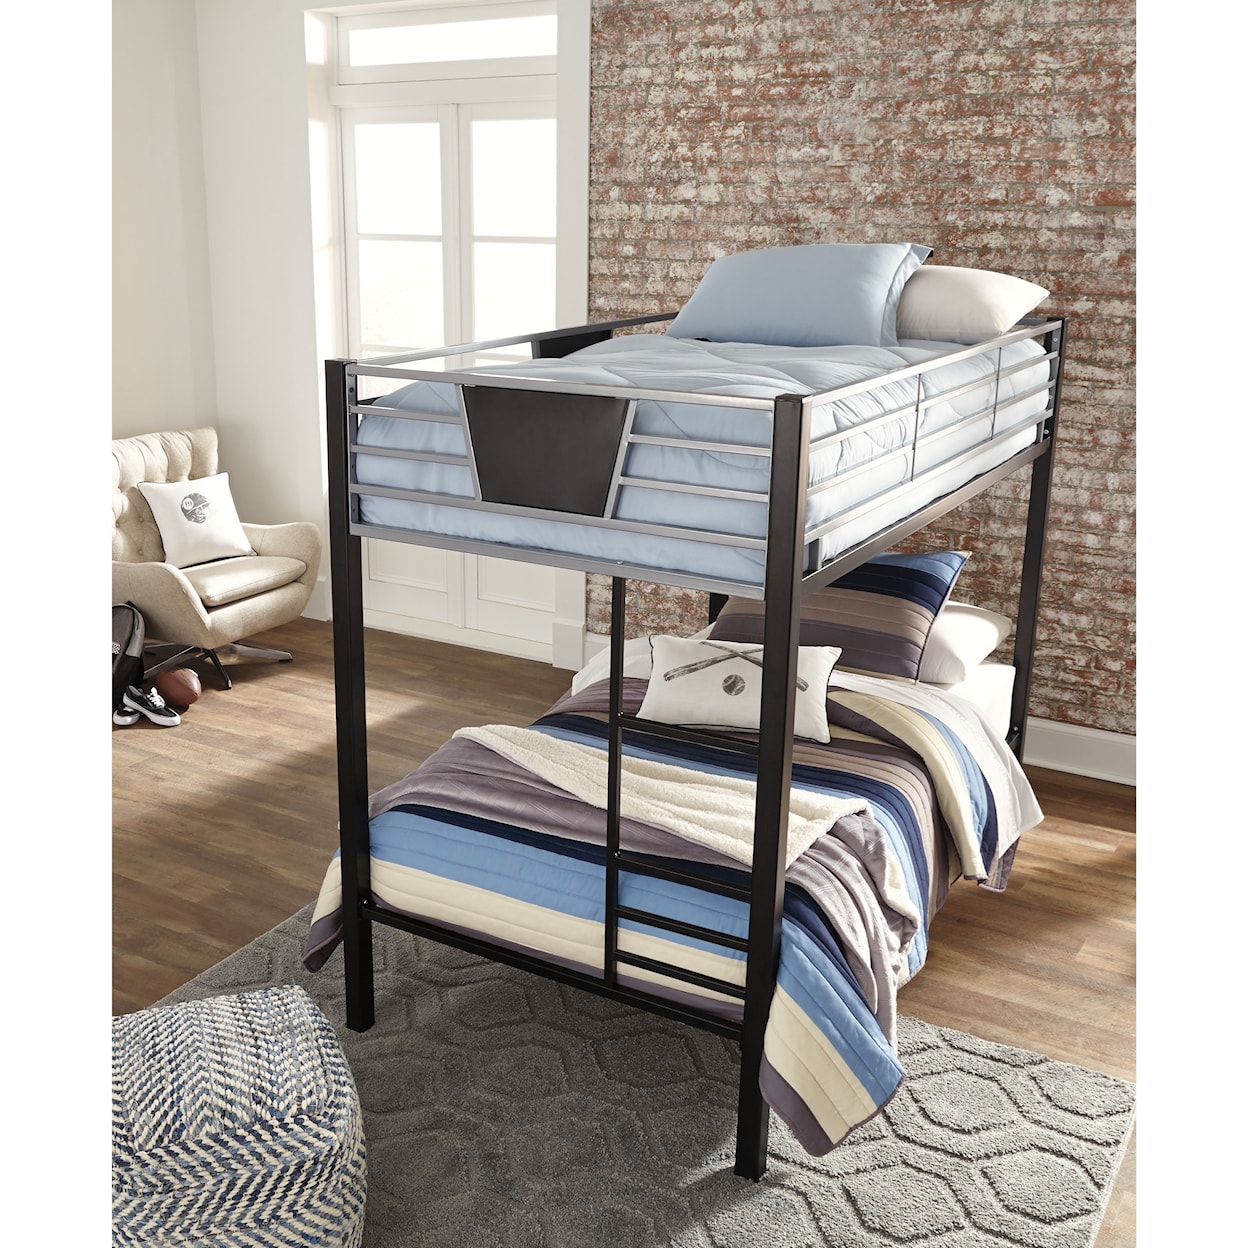 Signature Design Dinsmore Twin/Twin Bunk Bed w/ Ladder